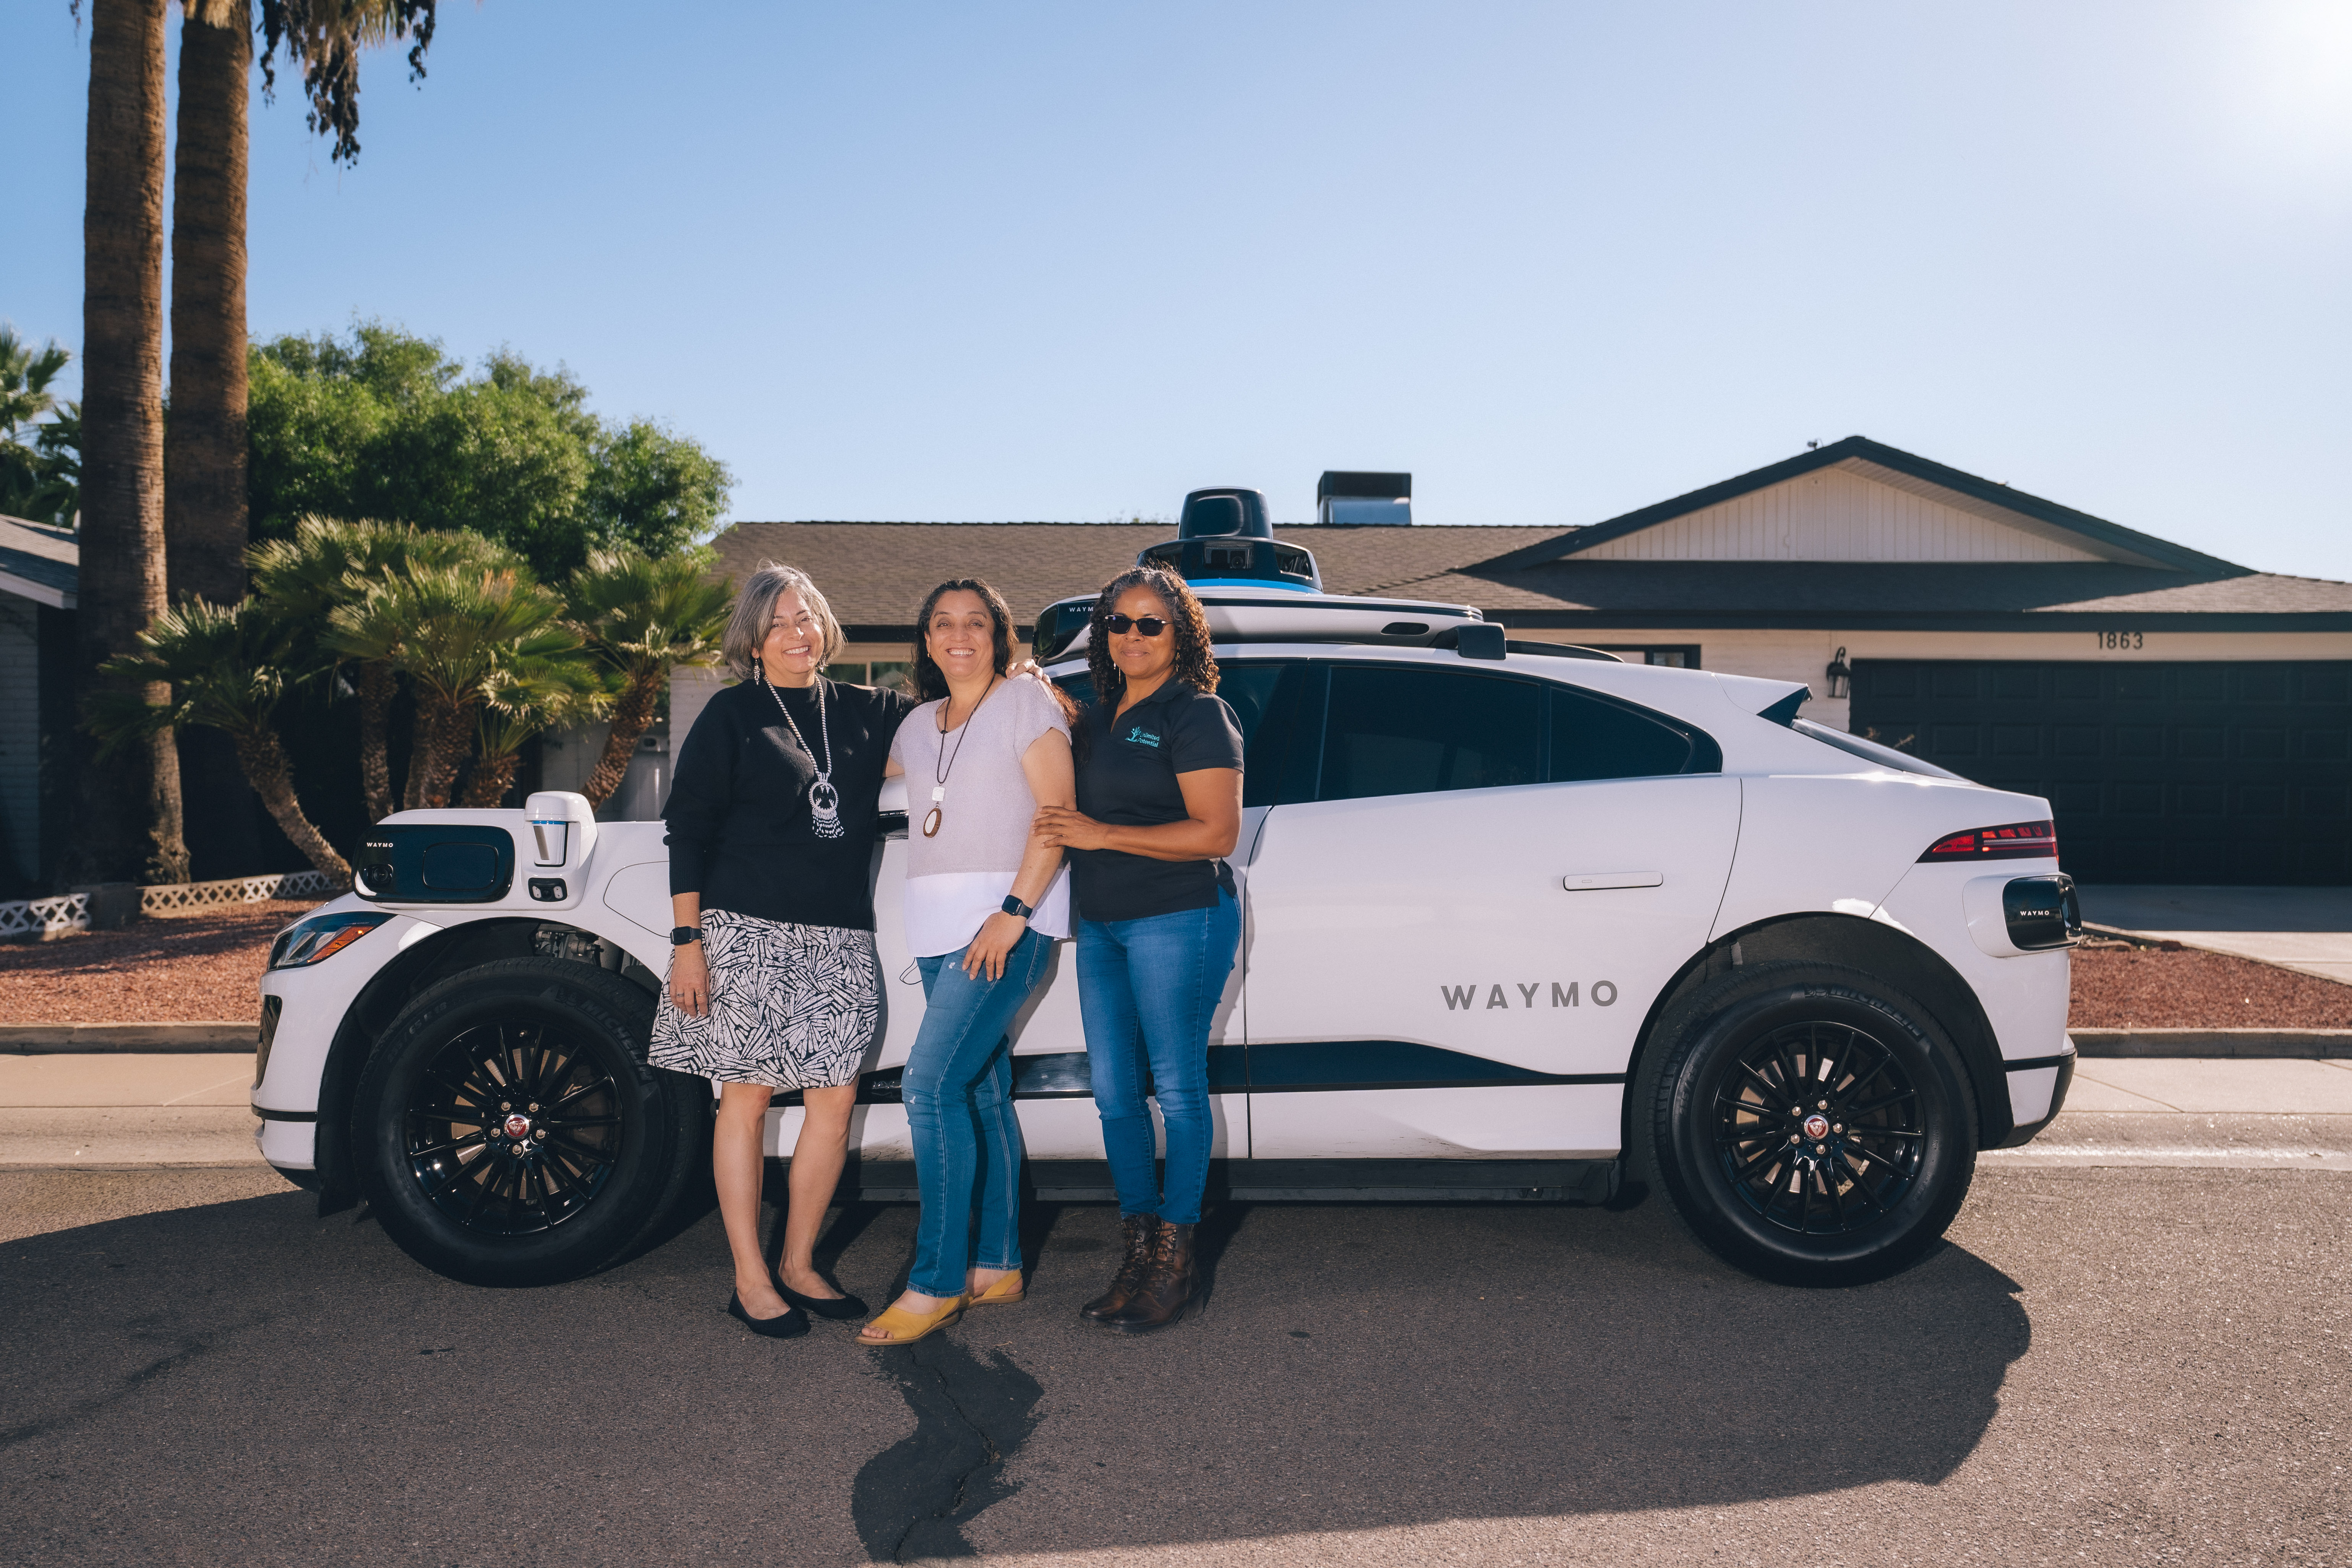 Emma, Juana, and Minerva from Unlimited Potential stand alongside a Waymo One ride-hailing vehicle